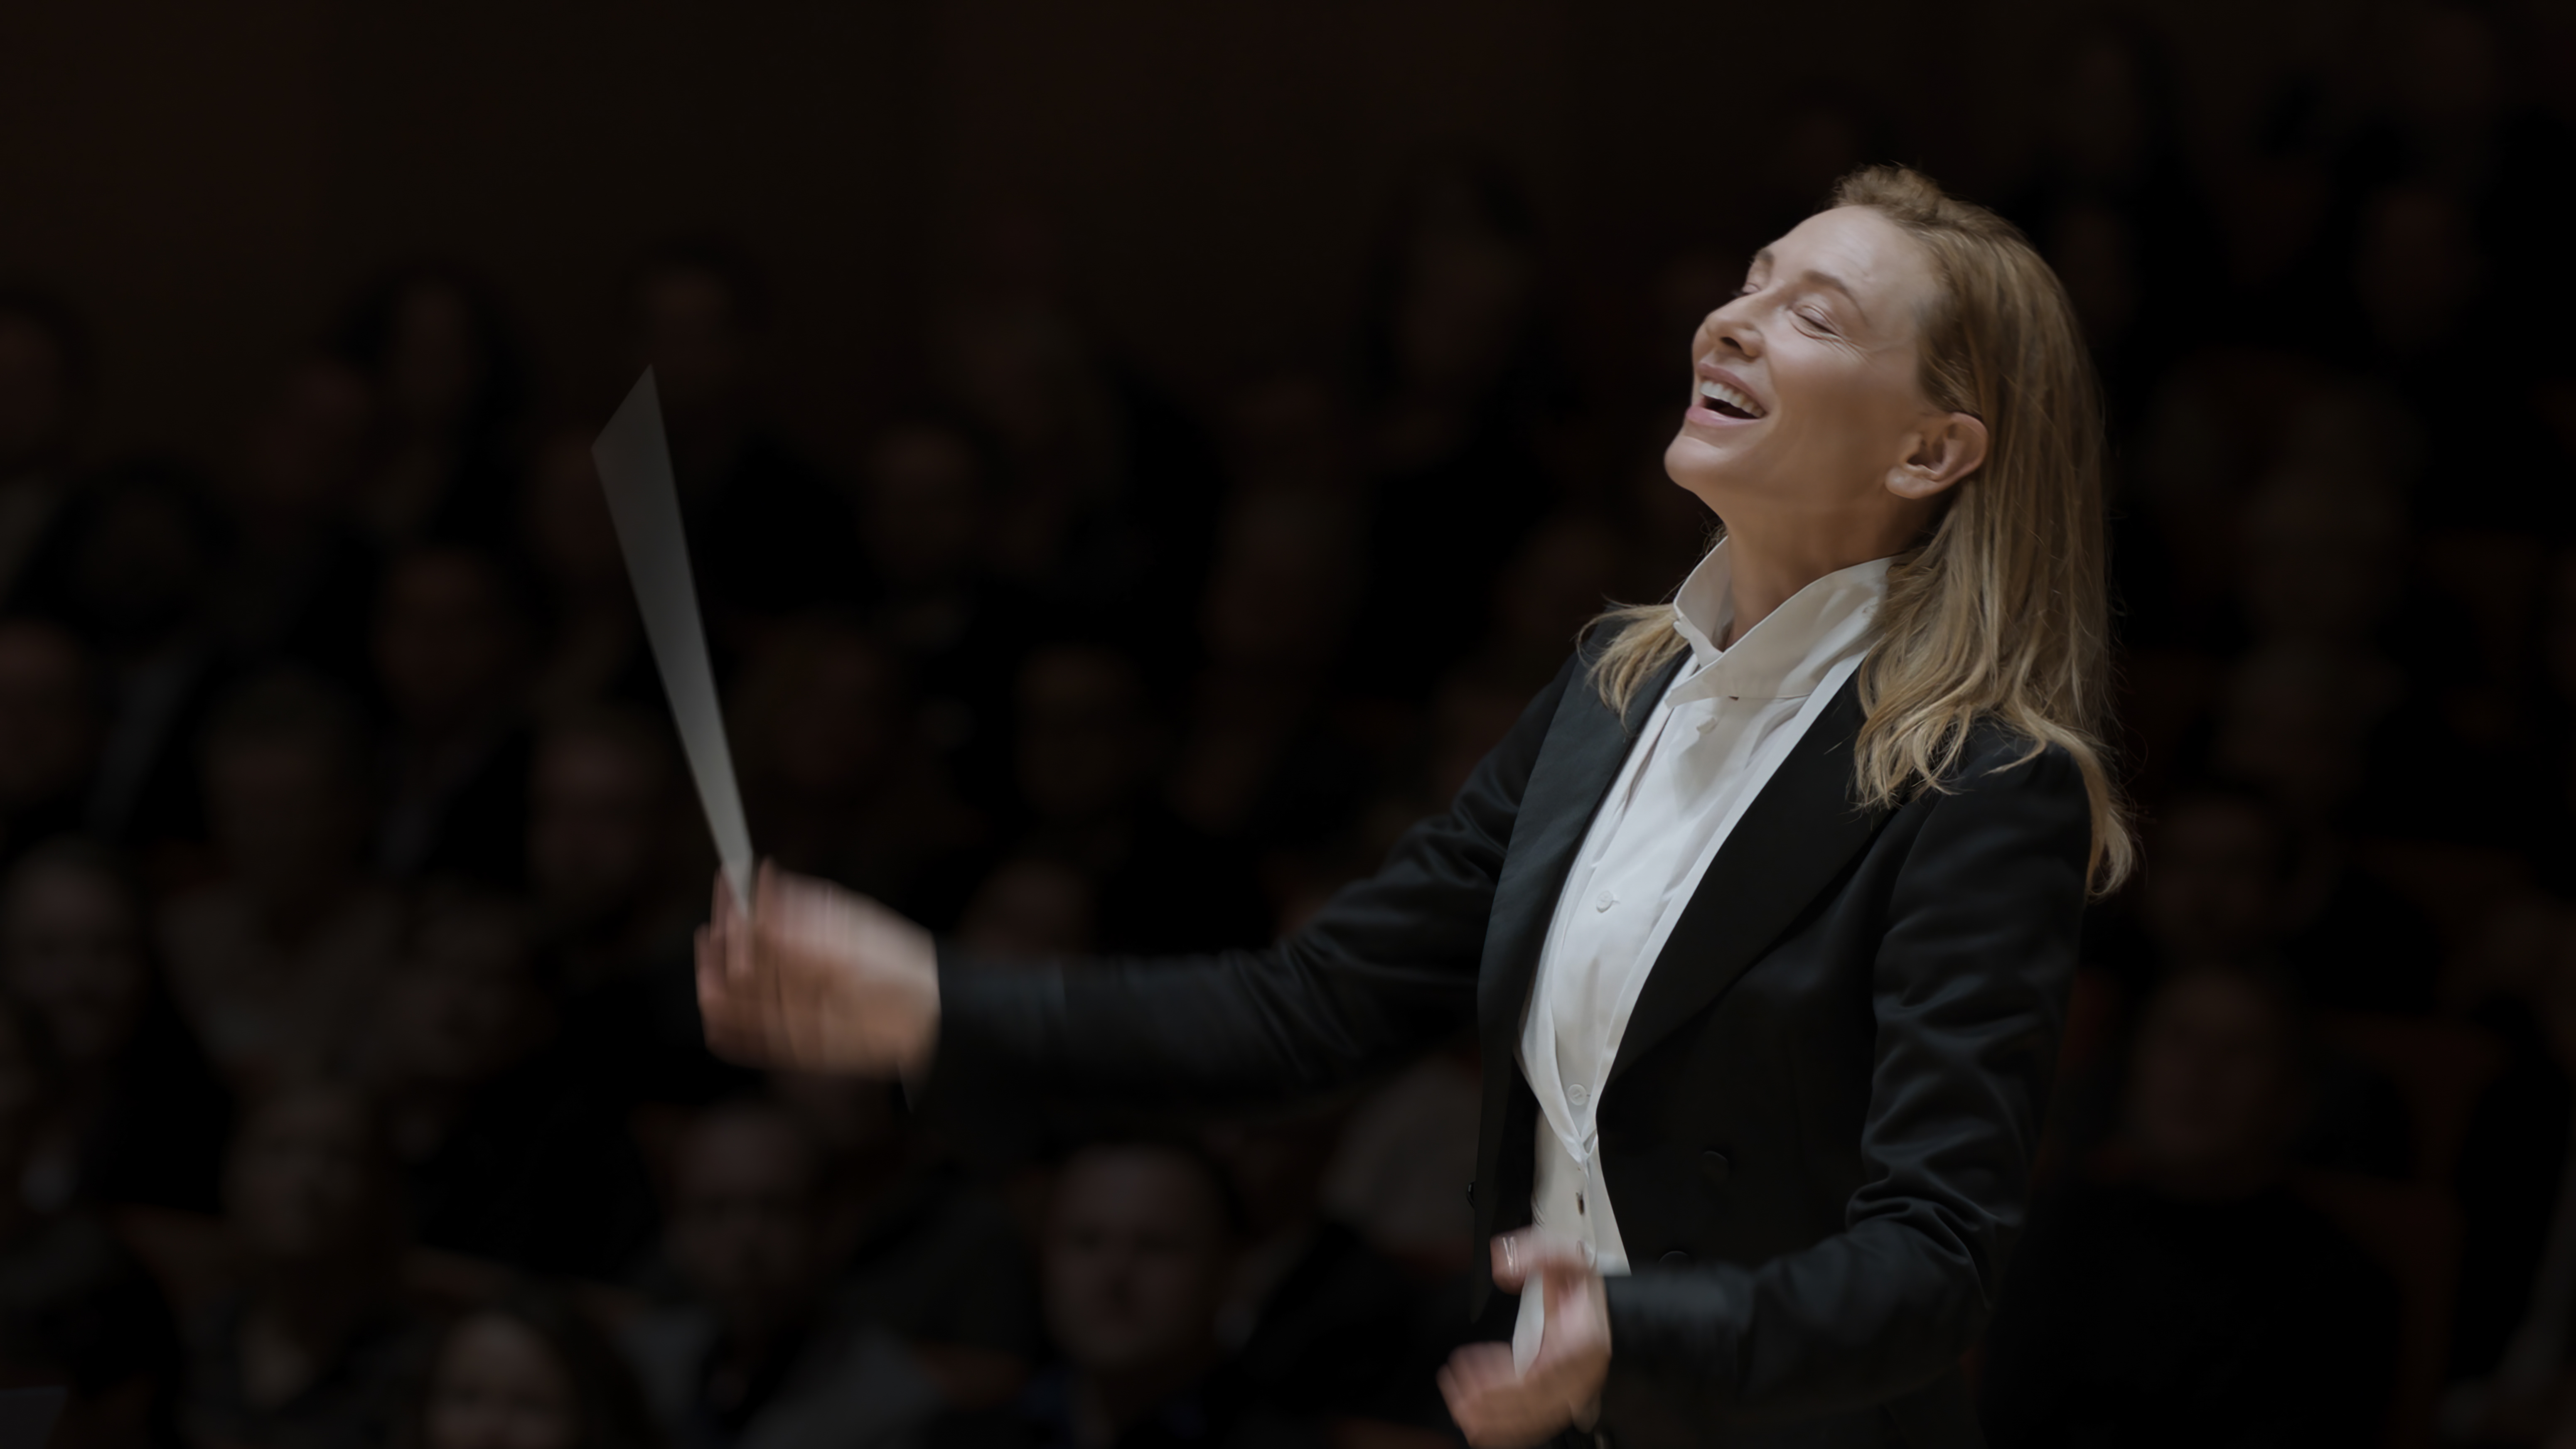 Cate Blanchett as an orchestra conductor, baton in hand.